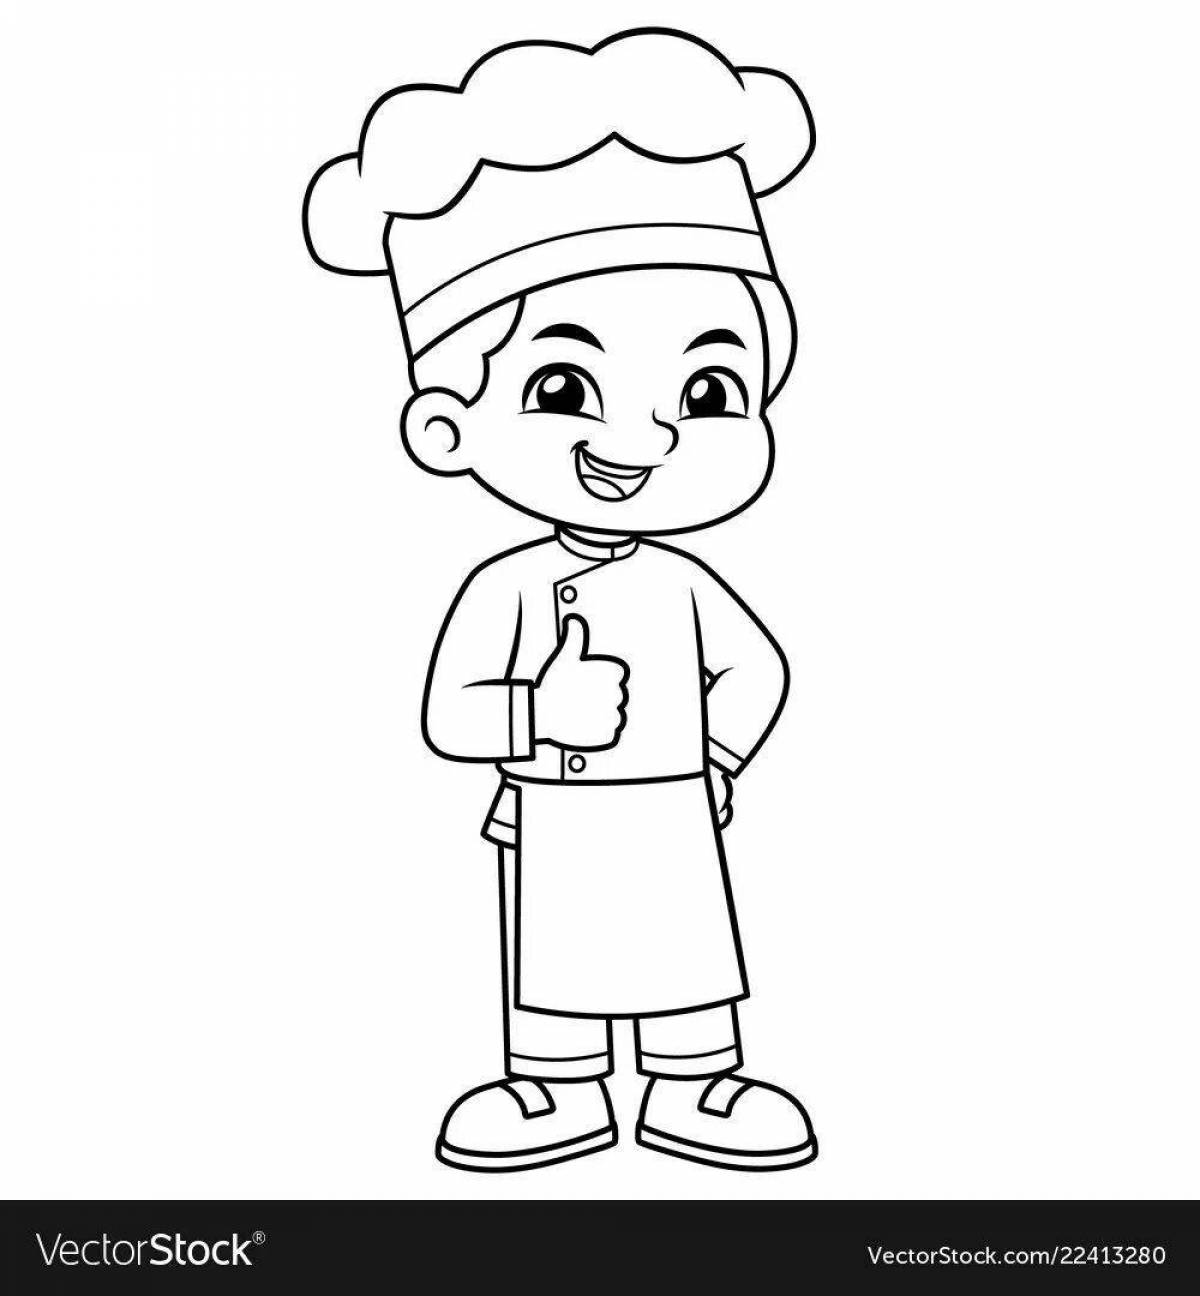 Coloring book playful pastry chef profession